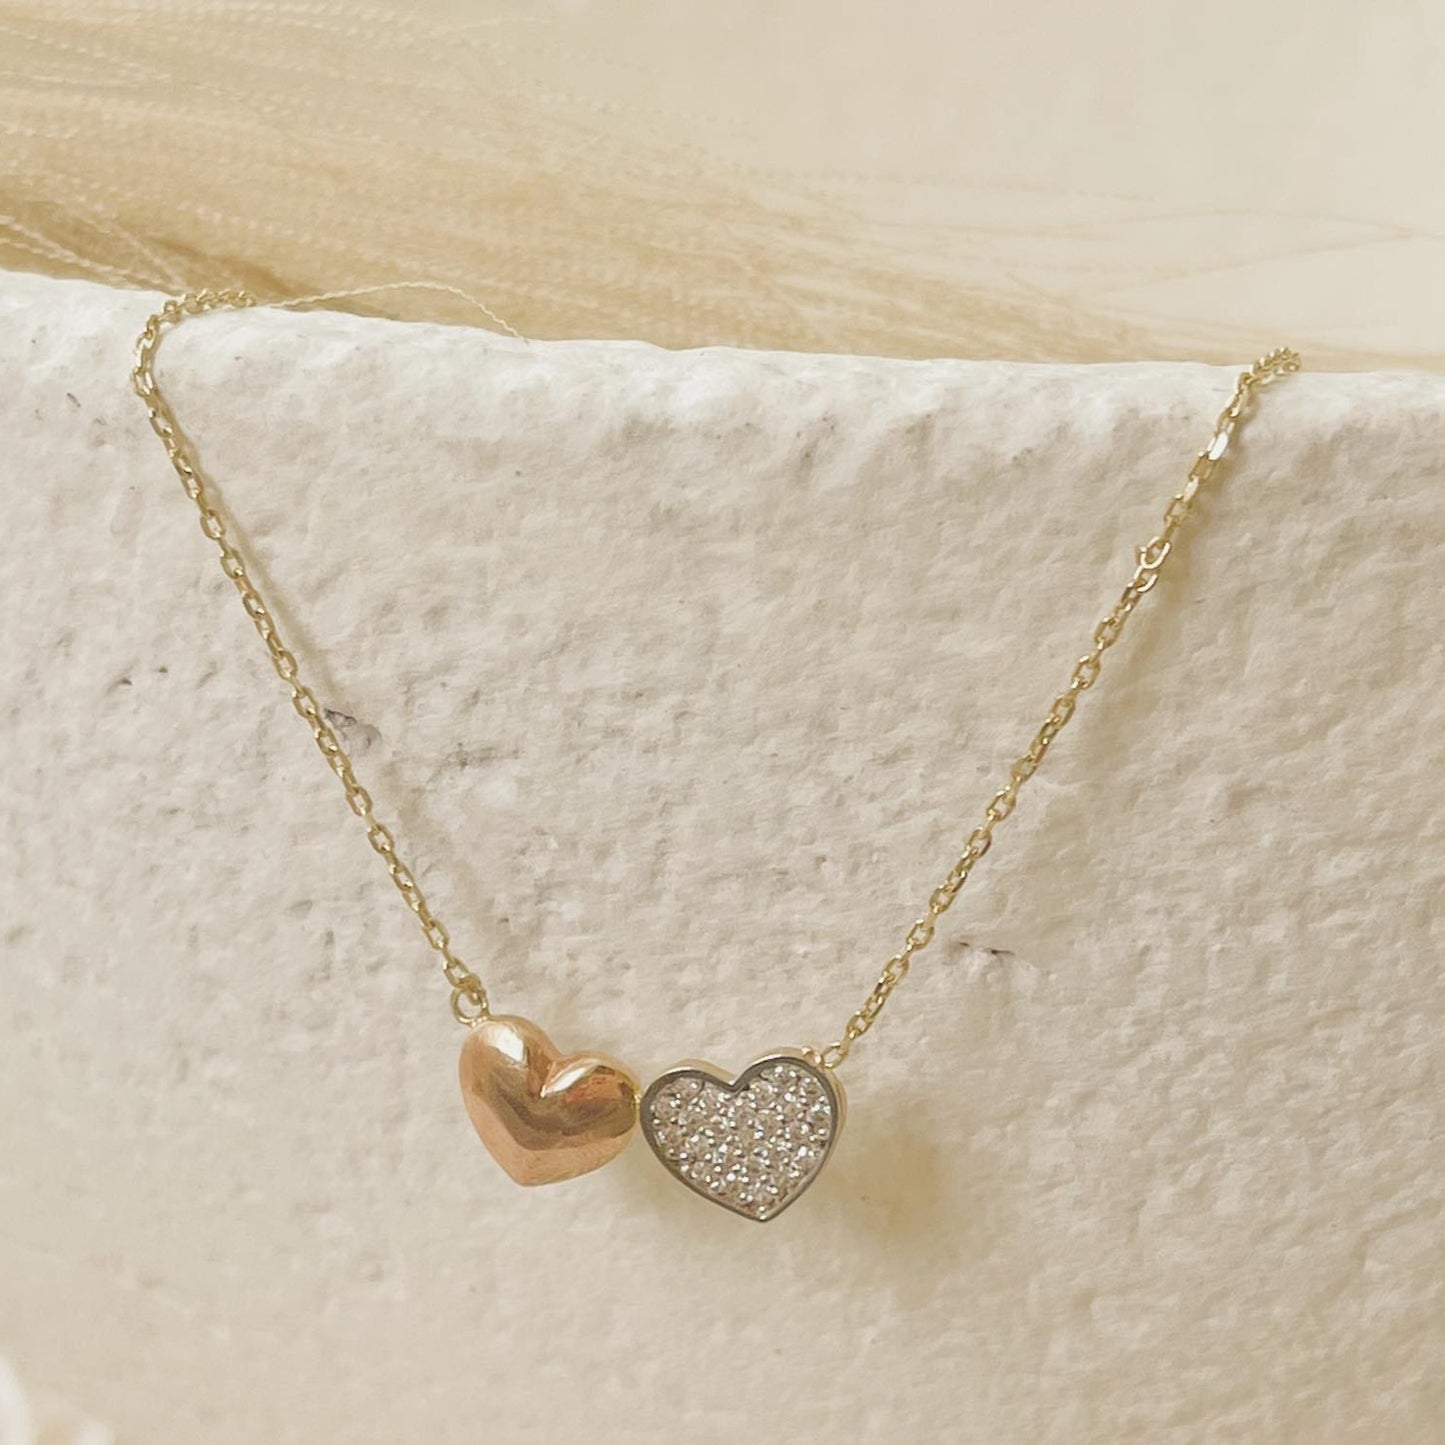 This is a double heart 10K gold pendant necklace. It is simple and delicate enough to add some charm and bling to any outfit. This love necklace can be used as a gift to your special one or just wear it on your special days.